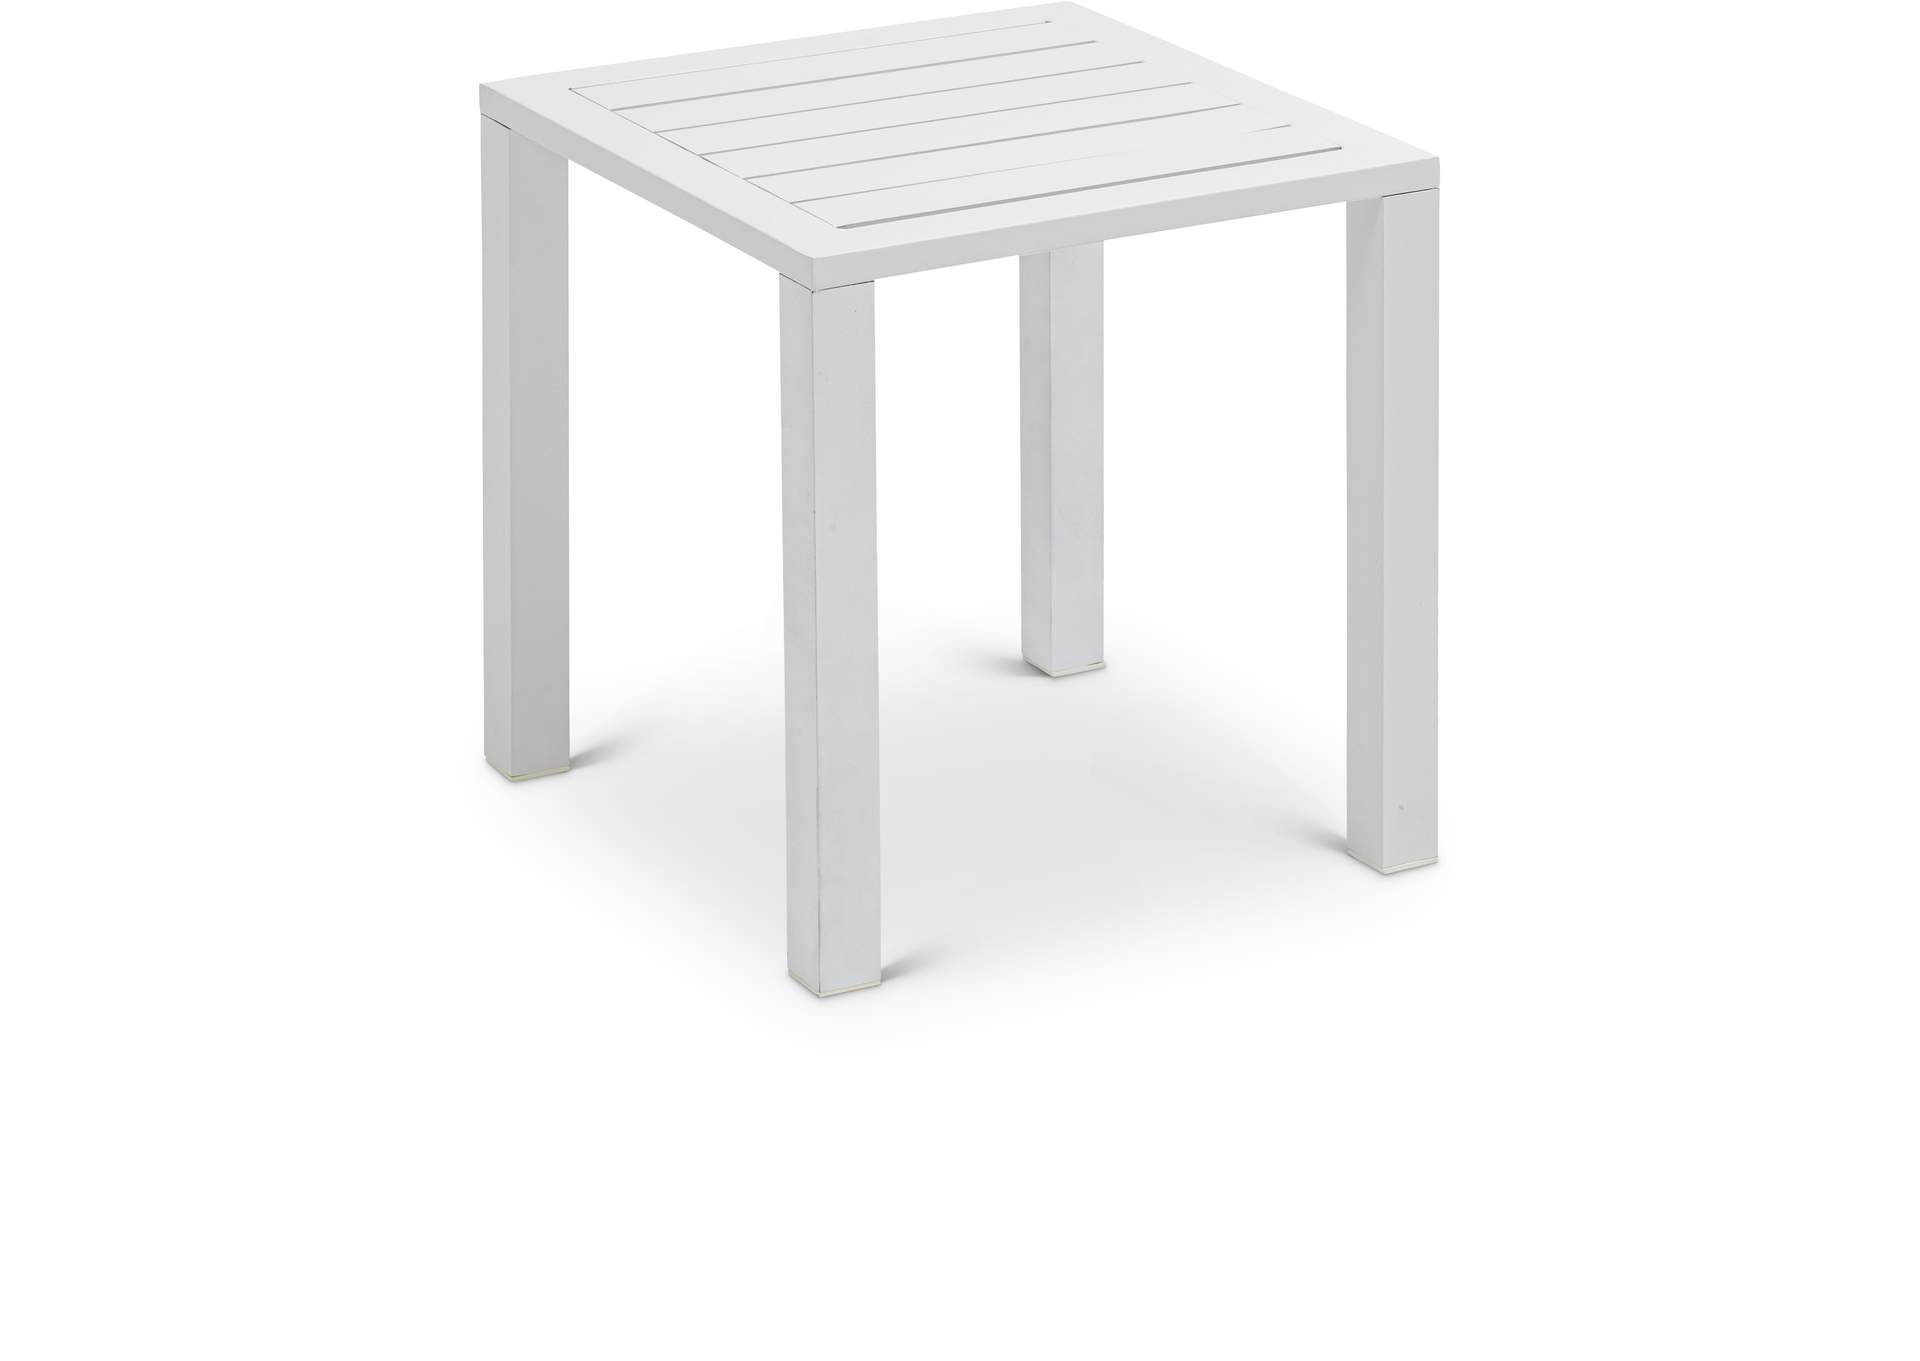 Maldives Outdoor Patio End Table,Meridian Furniture